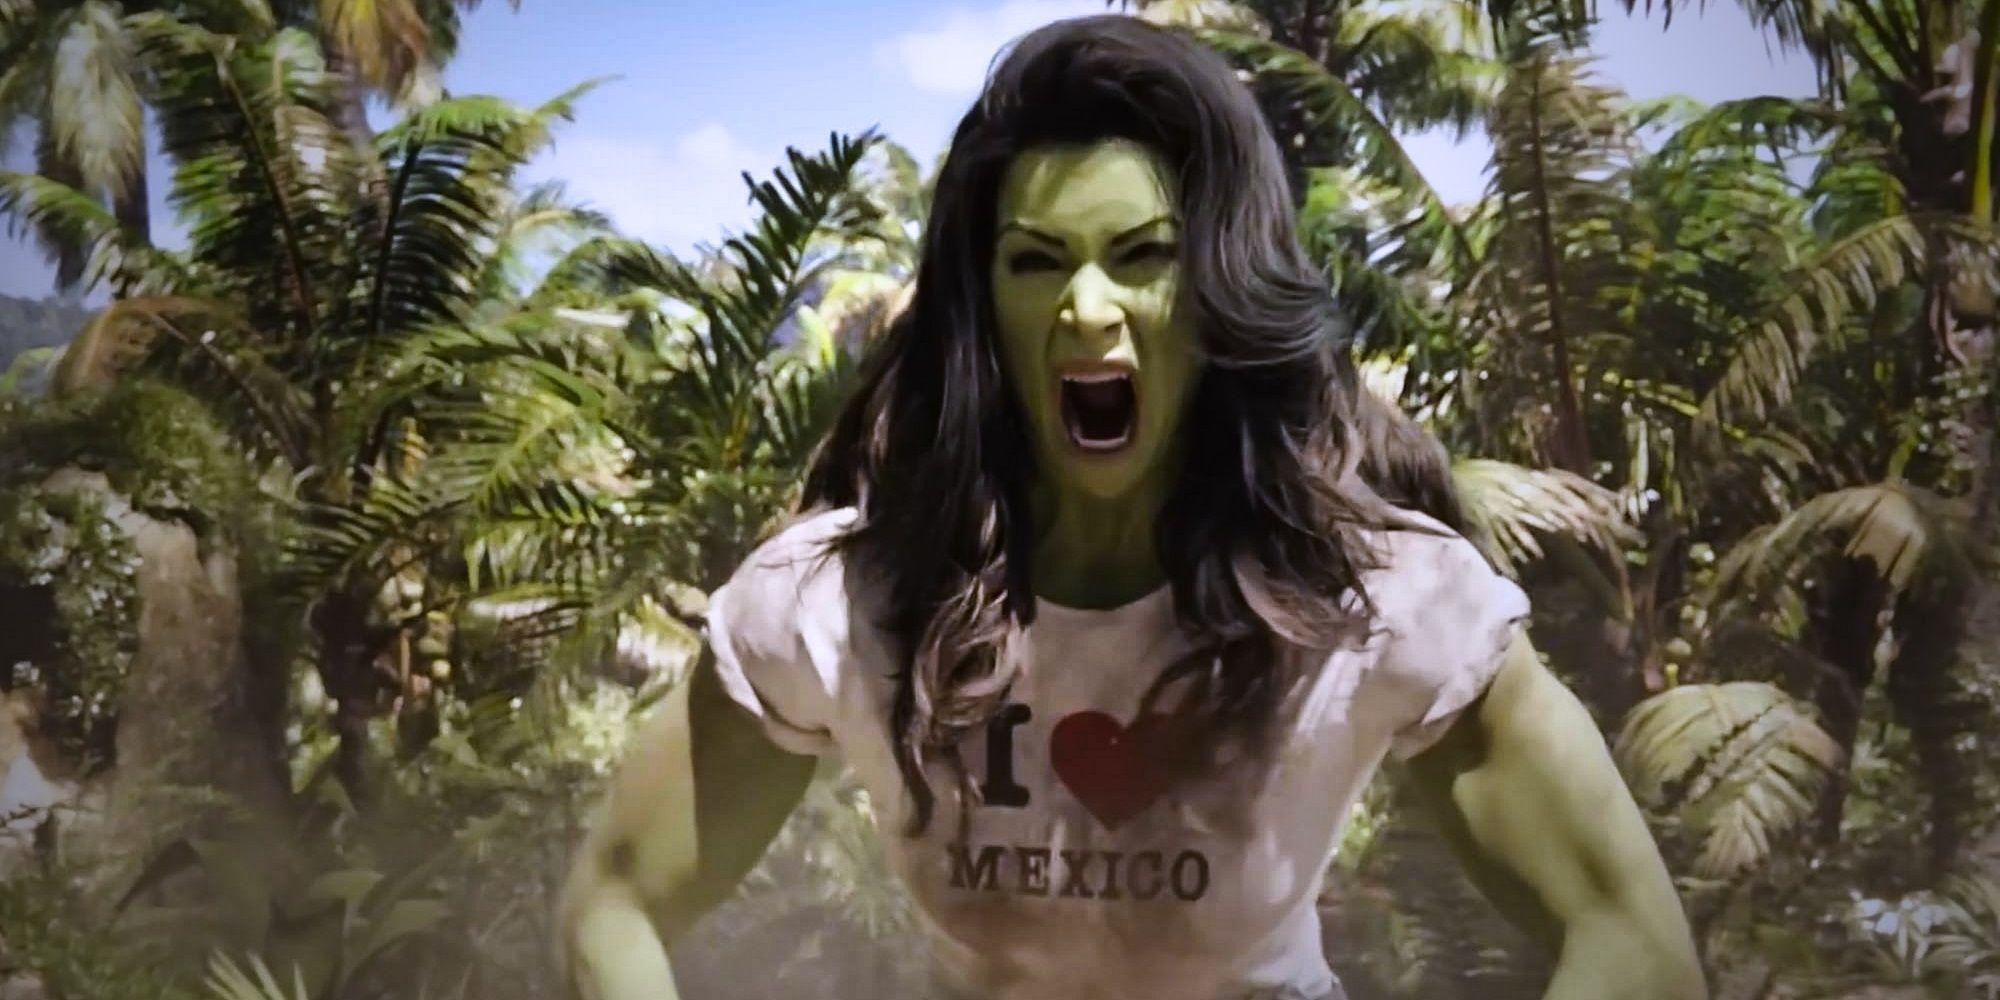 Jennifer Walter gets angry while outside in She-Hulk: Attorney at Law